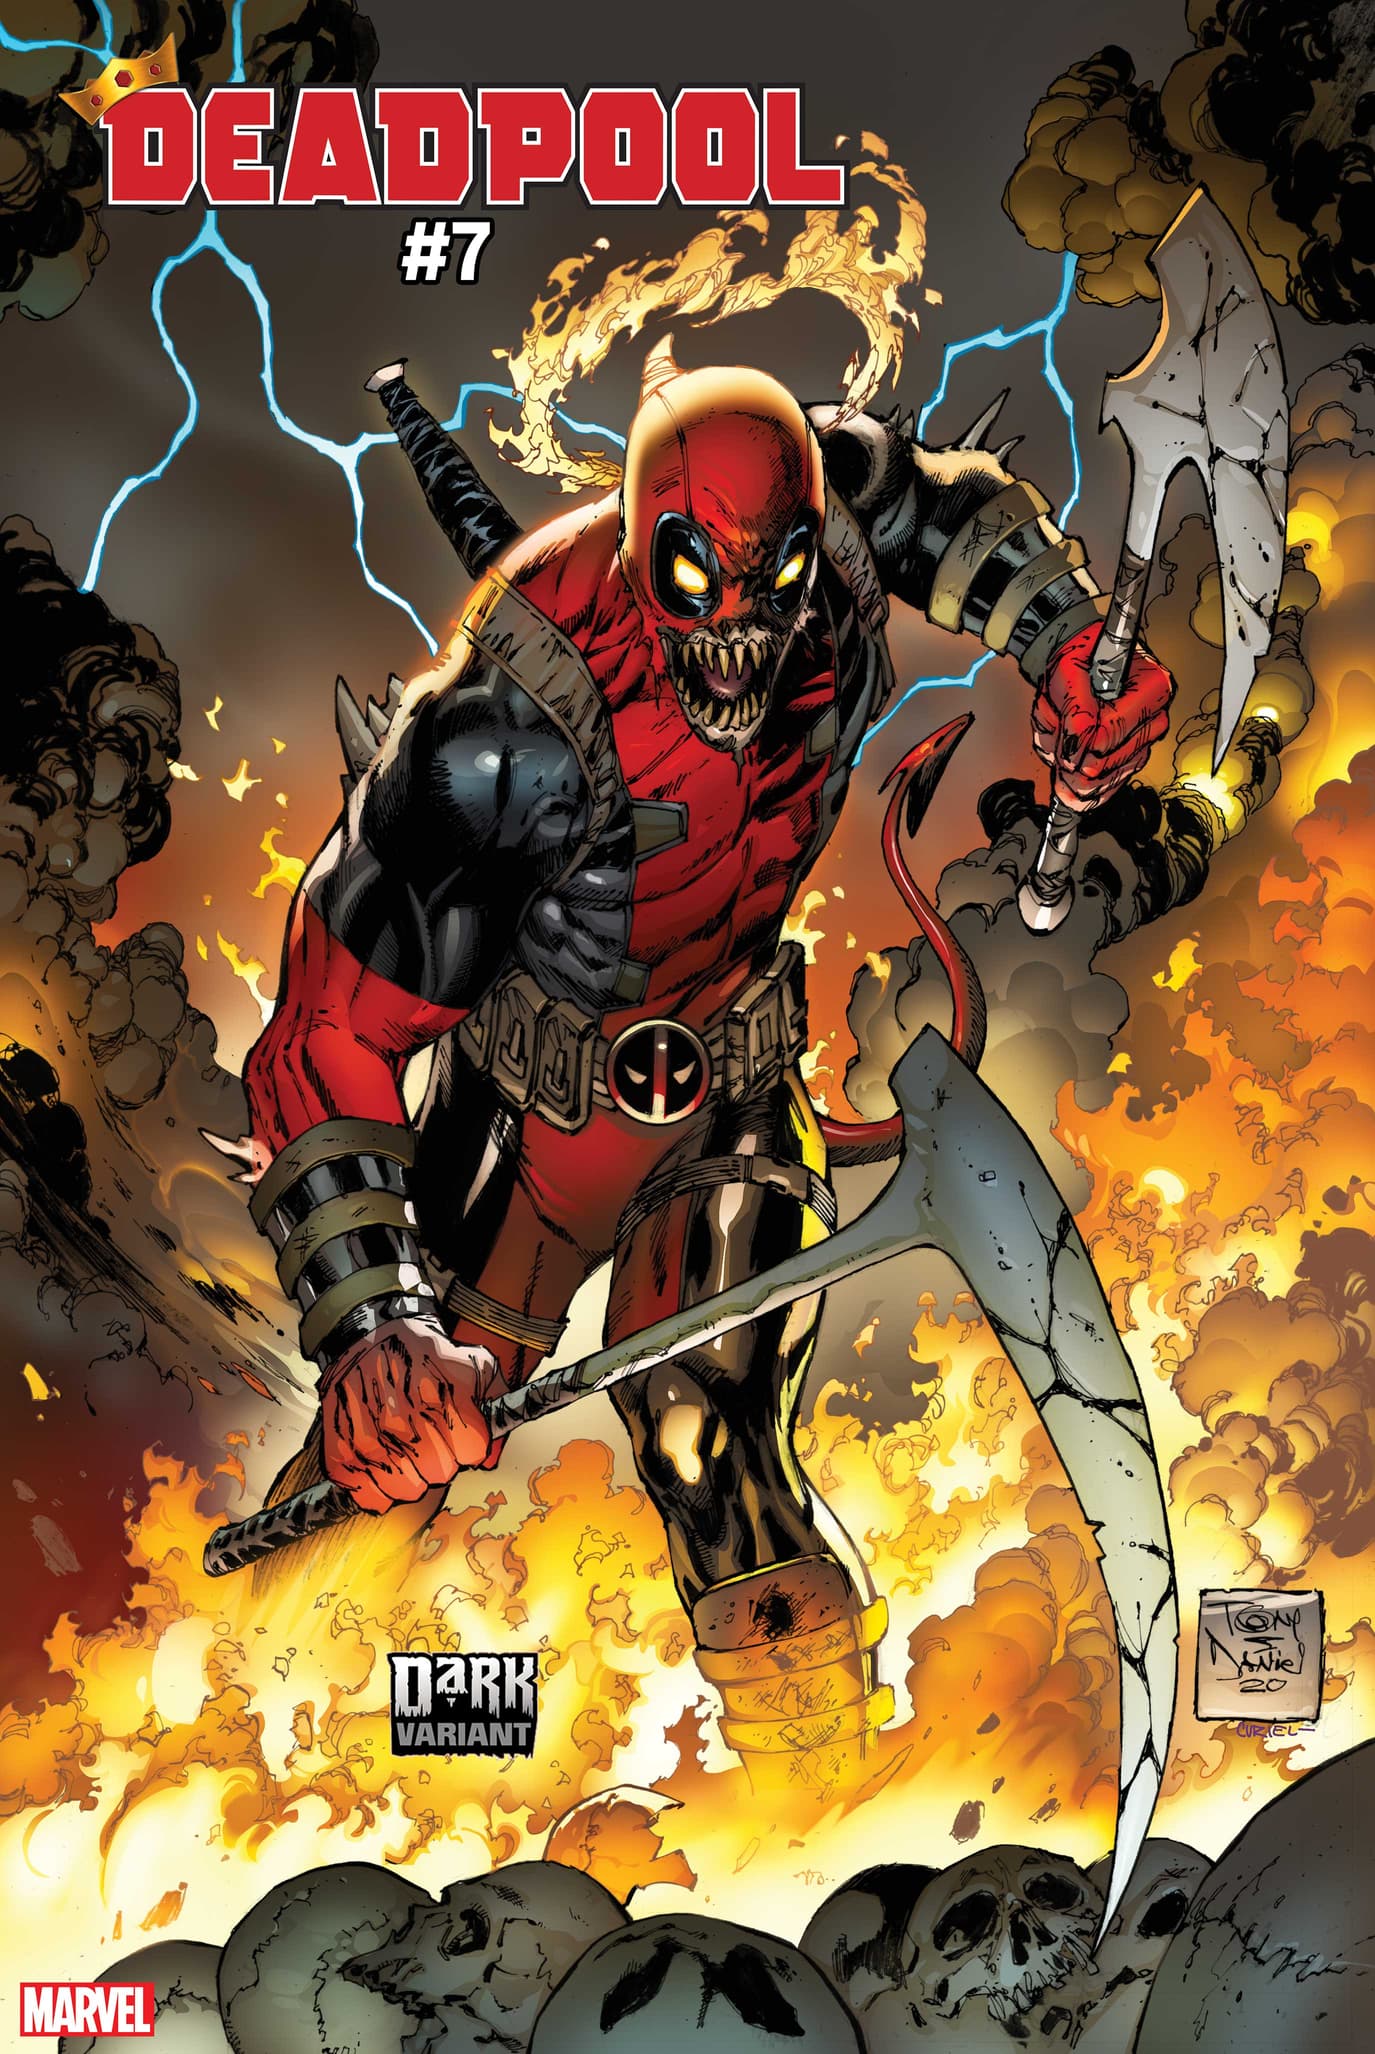 DEADPOOL #7 DARK MARVEL VARIANT by TONY DANIEL with colors by DAVID CURIEL 